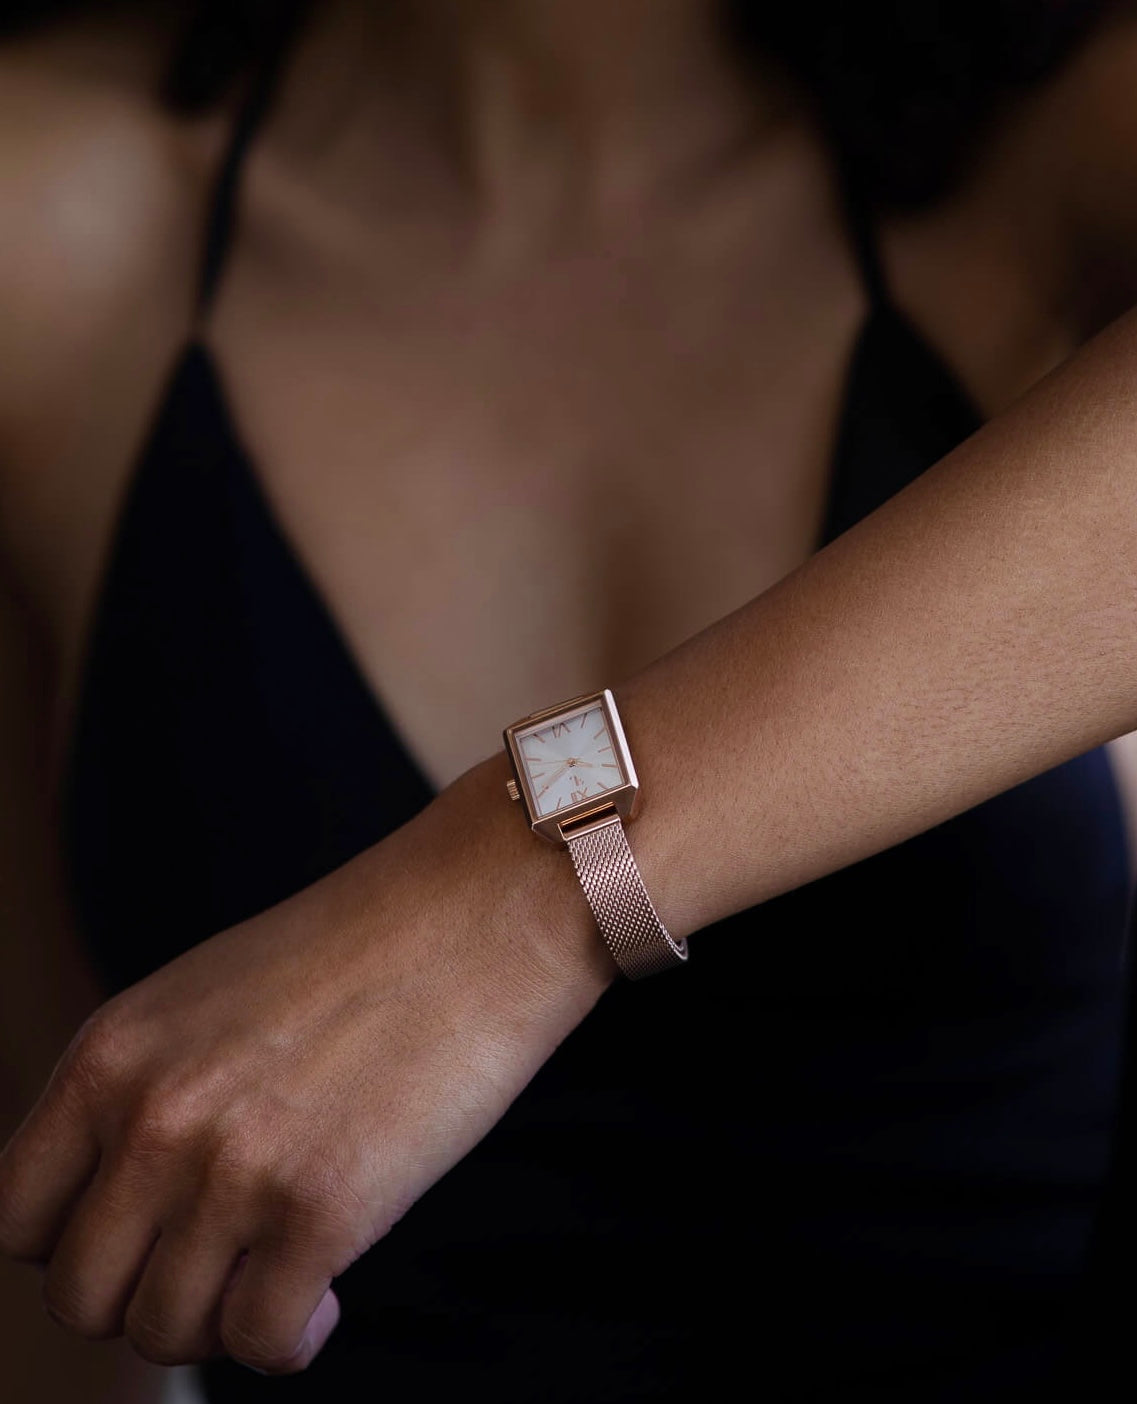 Rosedale designed by Five Jwlry. Discover a square watch for women made of a small silver dial, a case and rose gold hands. It is fitted with a mesh bracelet for absolute comfort!